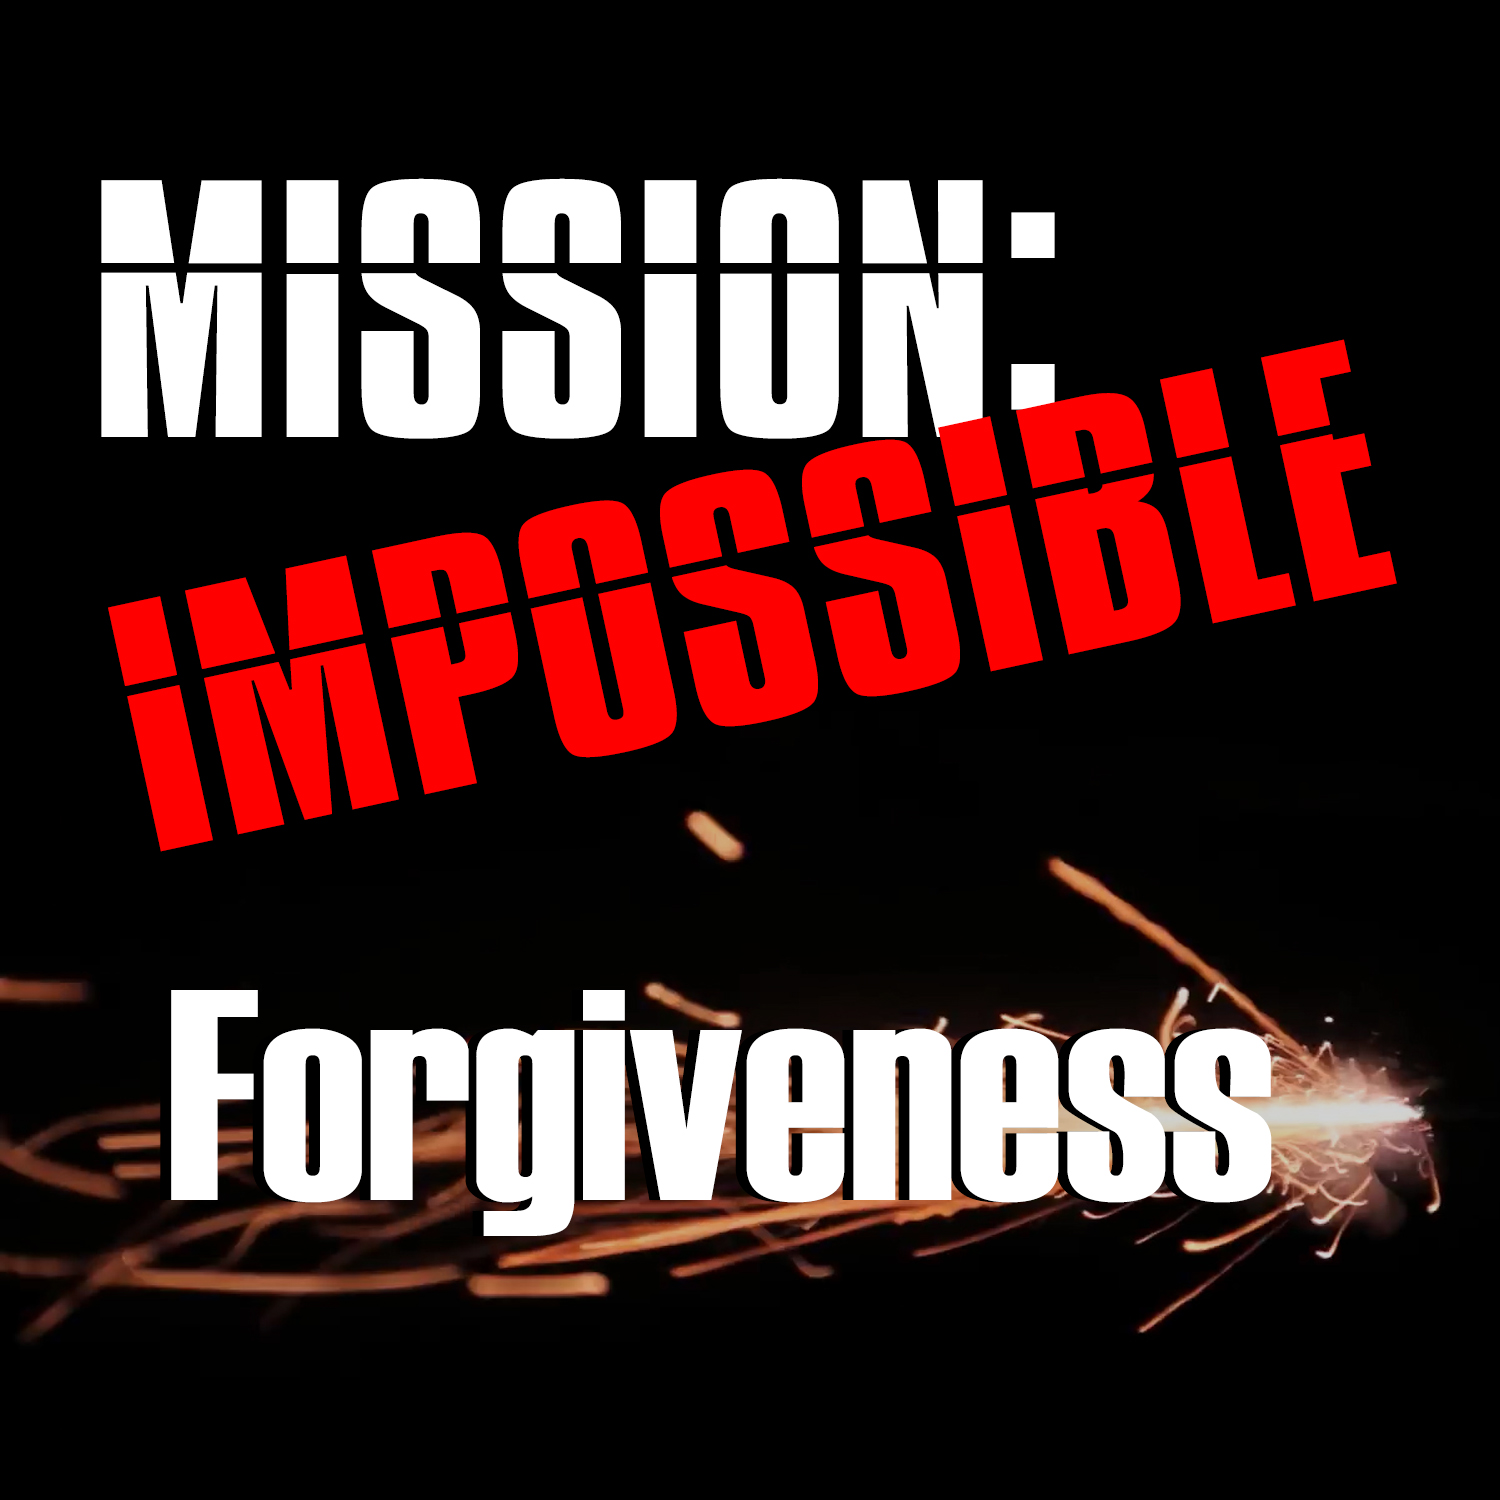 Forgiveness: Mission Impossible? (Week 1) - Receiving God's Forgiveness (Psalm 51:1-15)